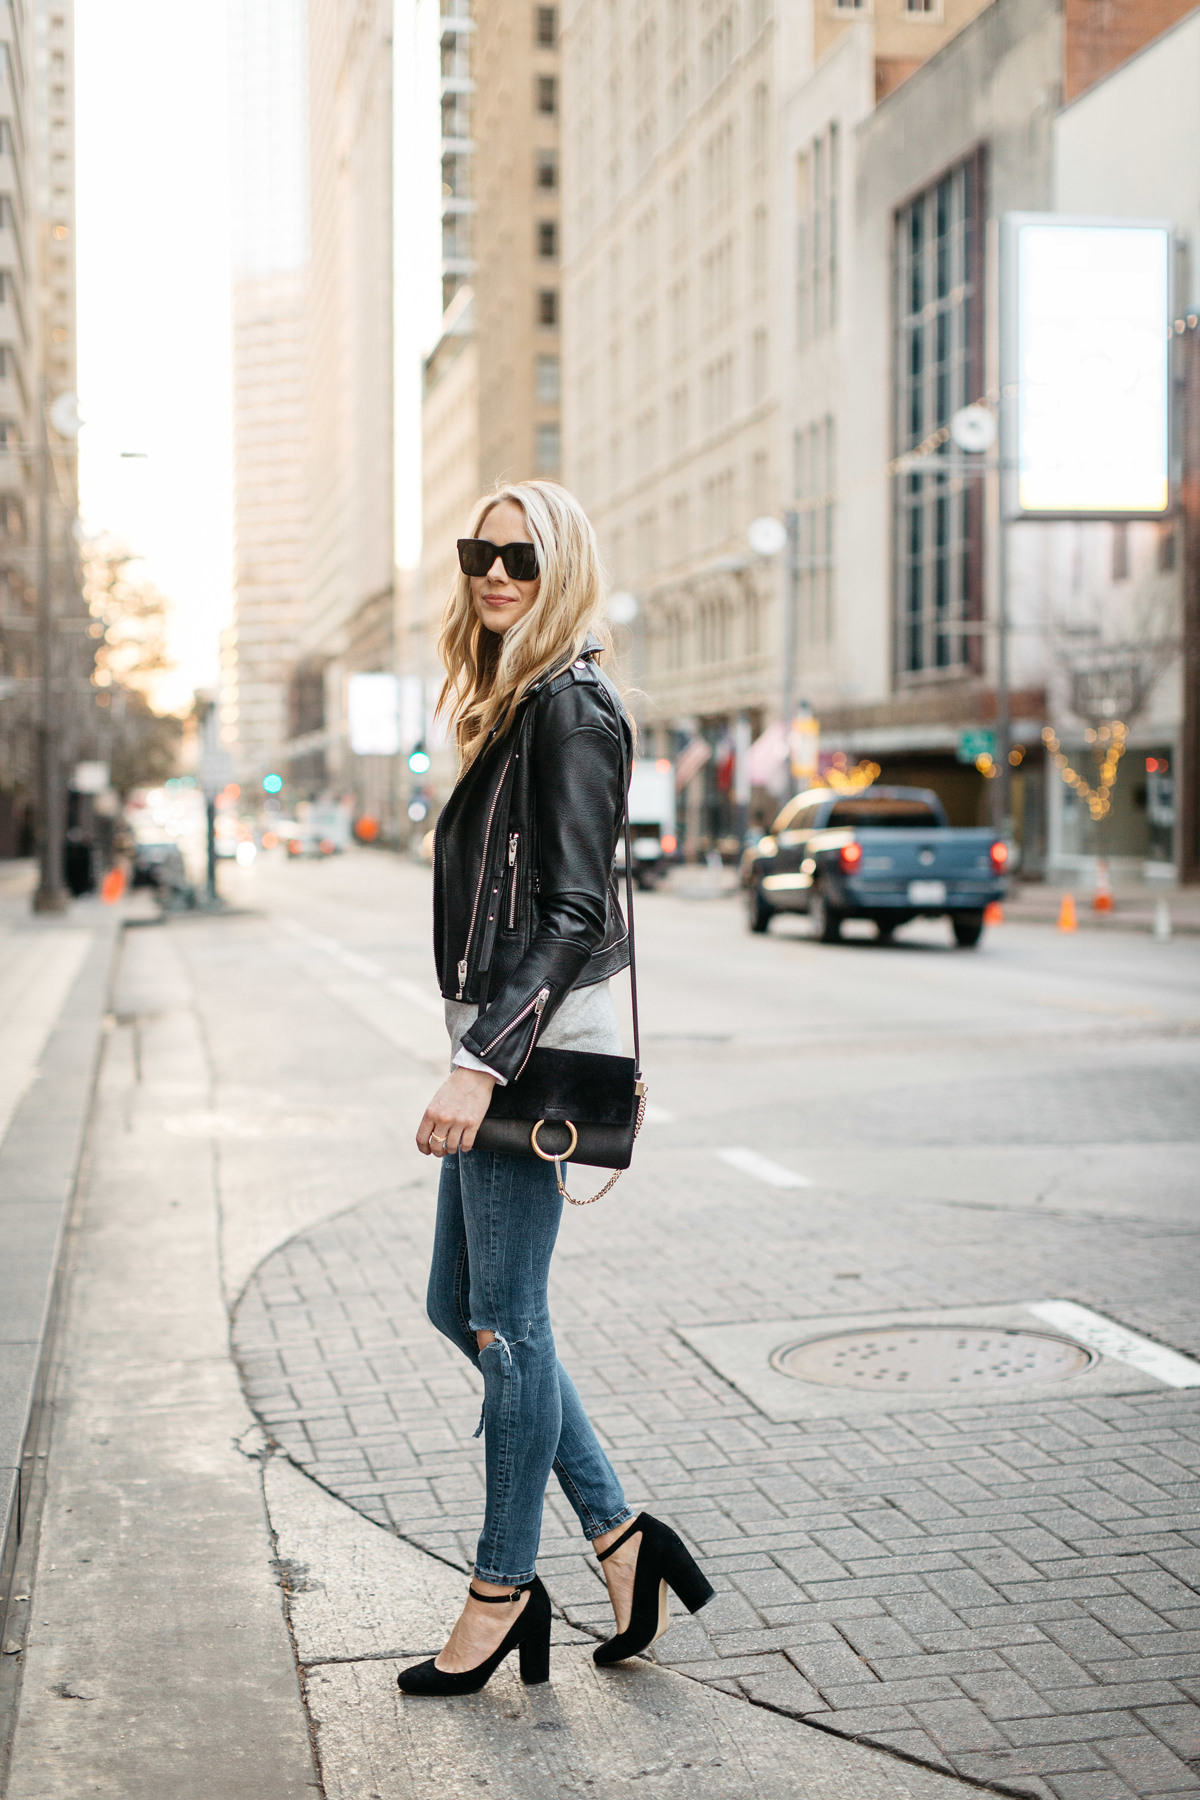 Fall Outfit, Winter Outfit, Black Leather Jacket, Grey Sweater, White Button-Down Shirt, Denim Ripped Skinny Jeans, Black Ankle Strap Pumps, Chloe Faye Handbag